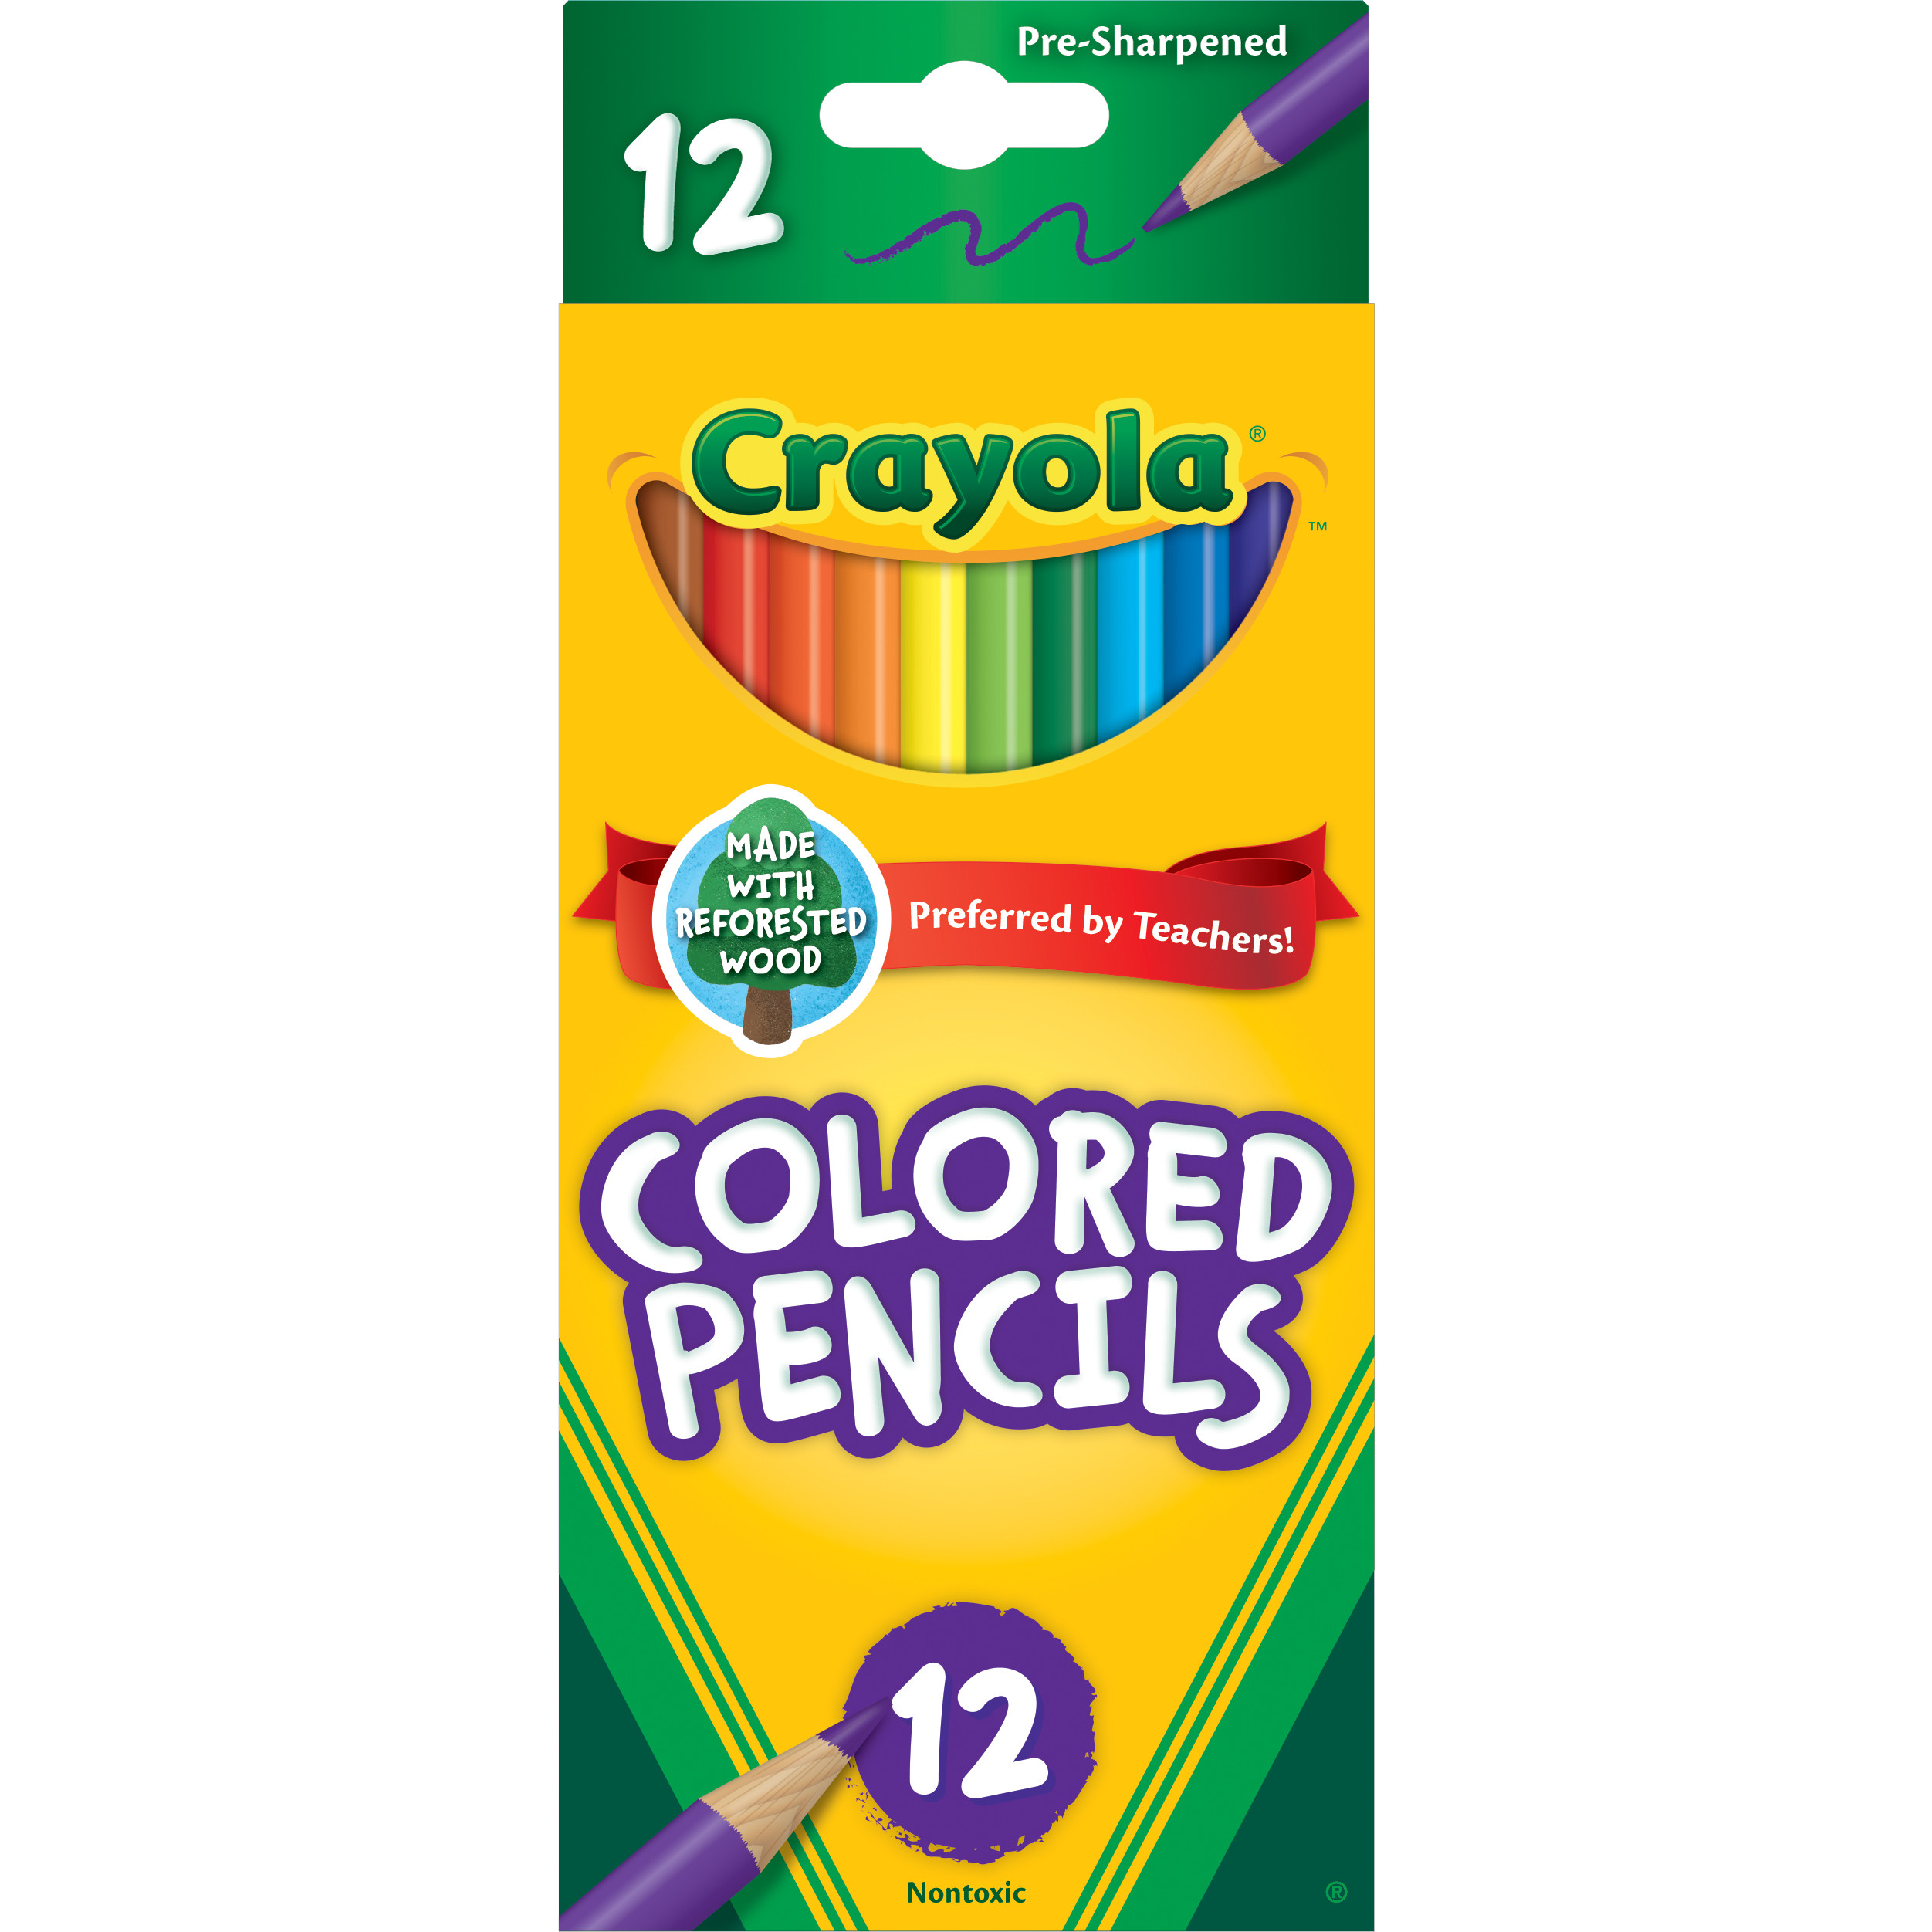 Crayola Colored Pencils, Assorted Colors, Pre-sharpened, Adult Coloring, 12 Count - image 1 of 7